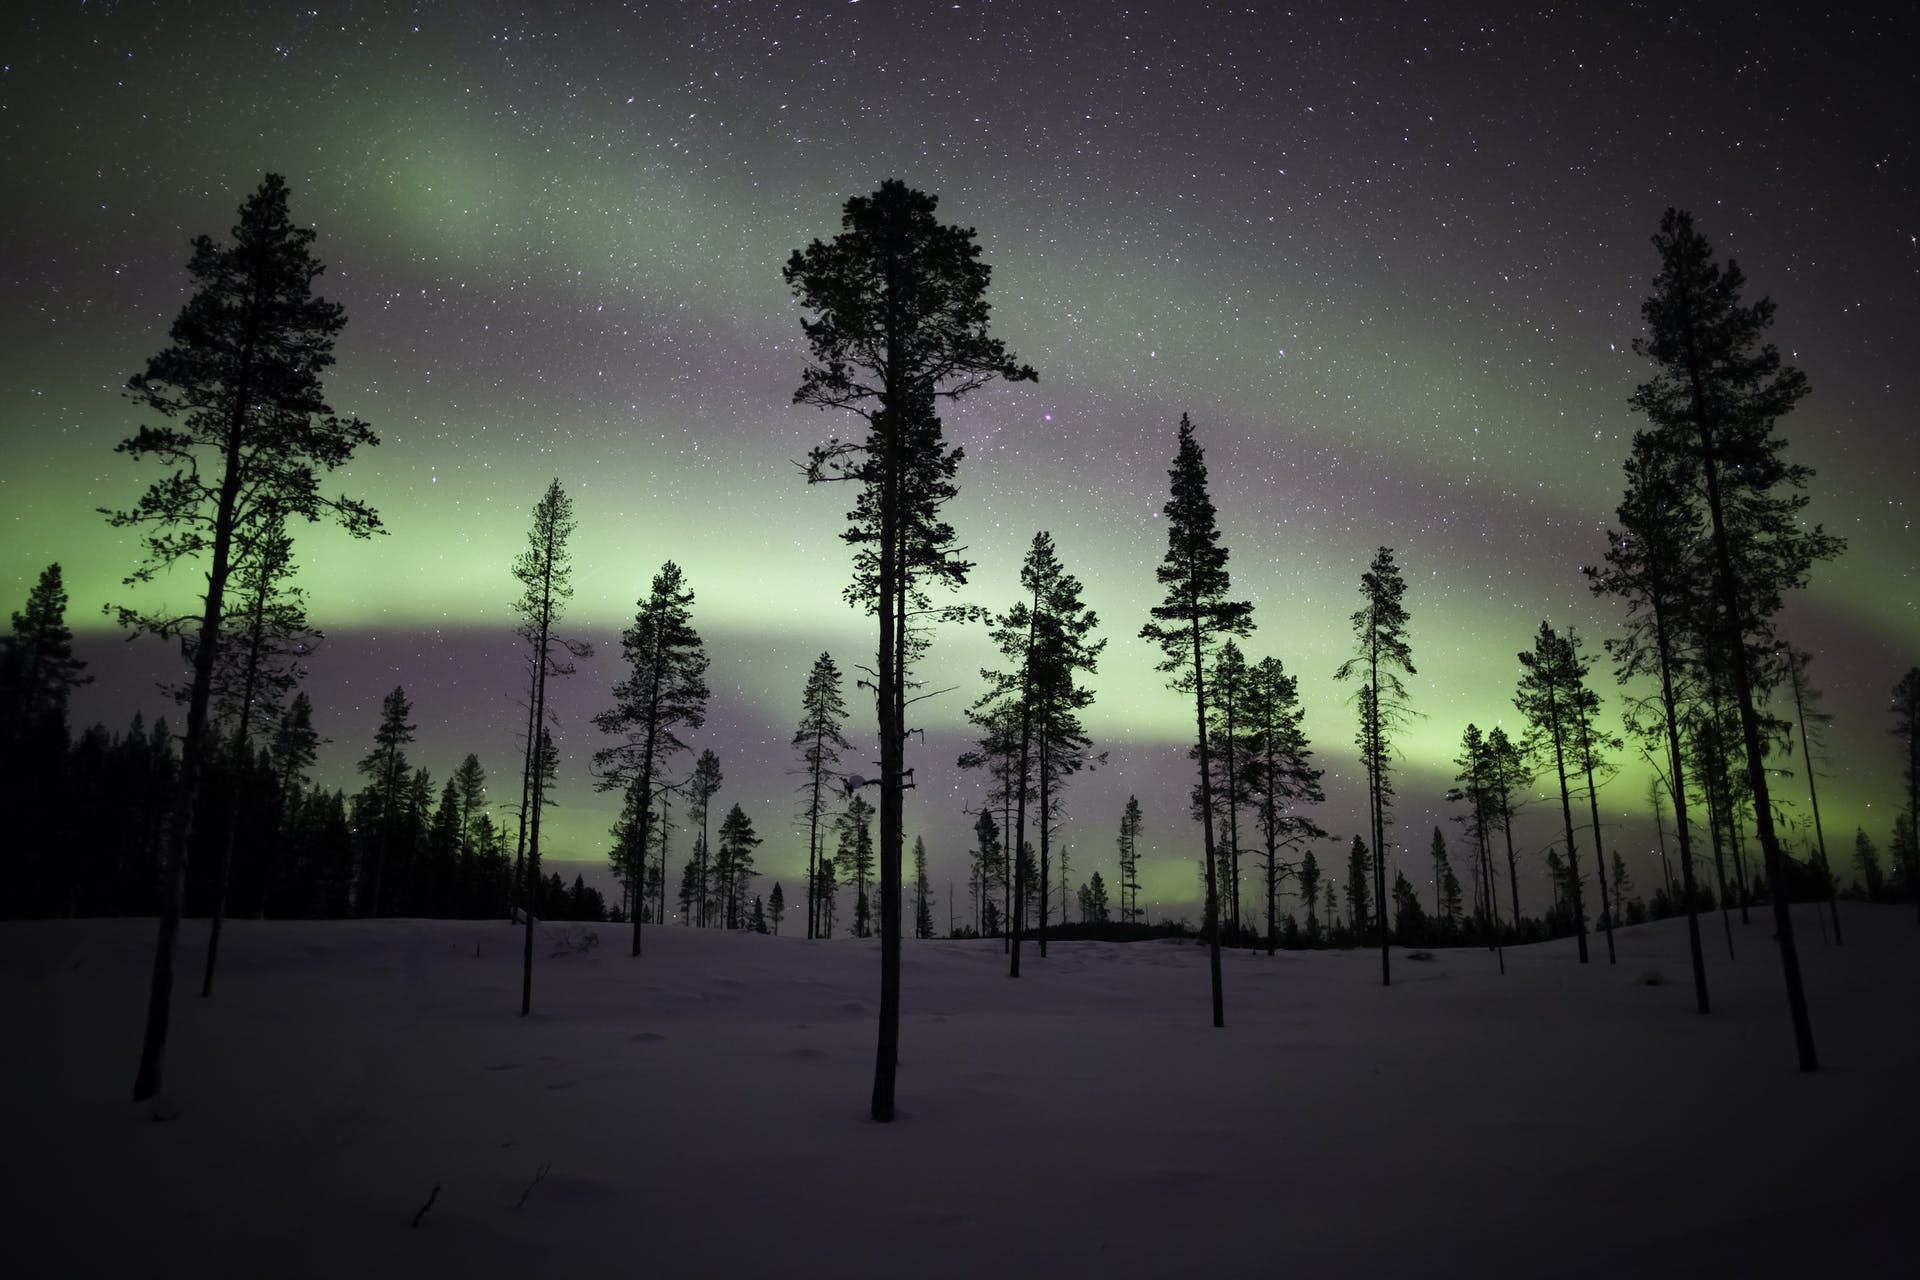 The Northern Lights in the snow, with pine trees silhouetted in the foreground.